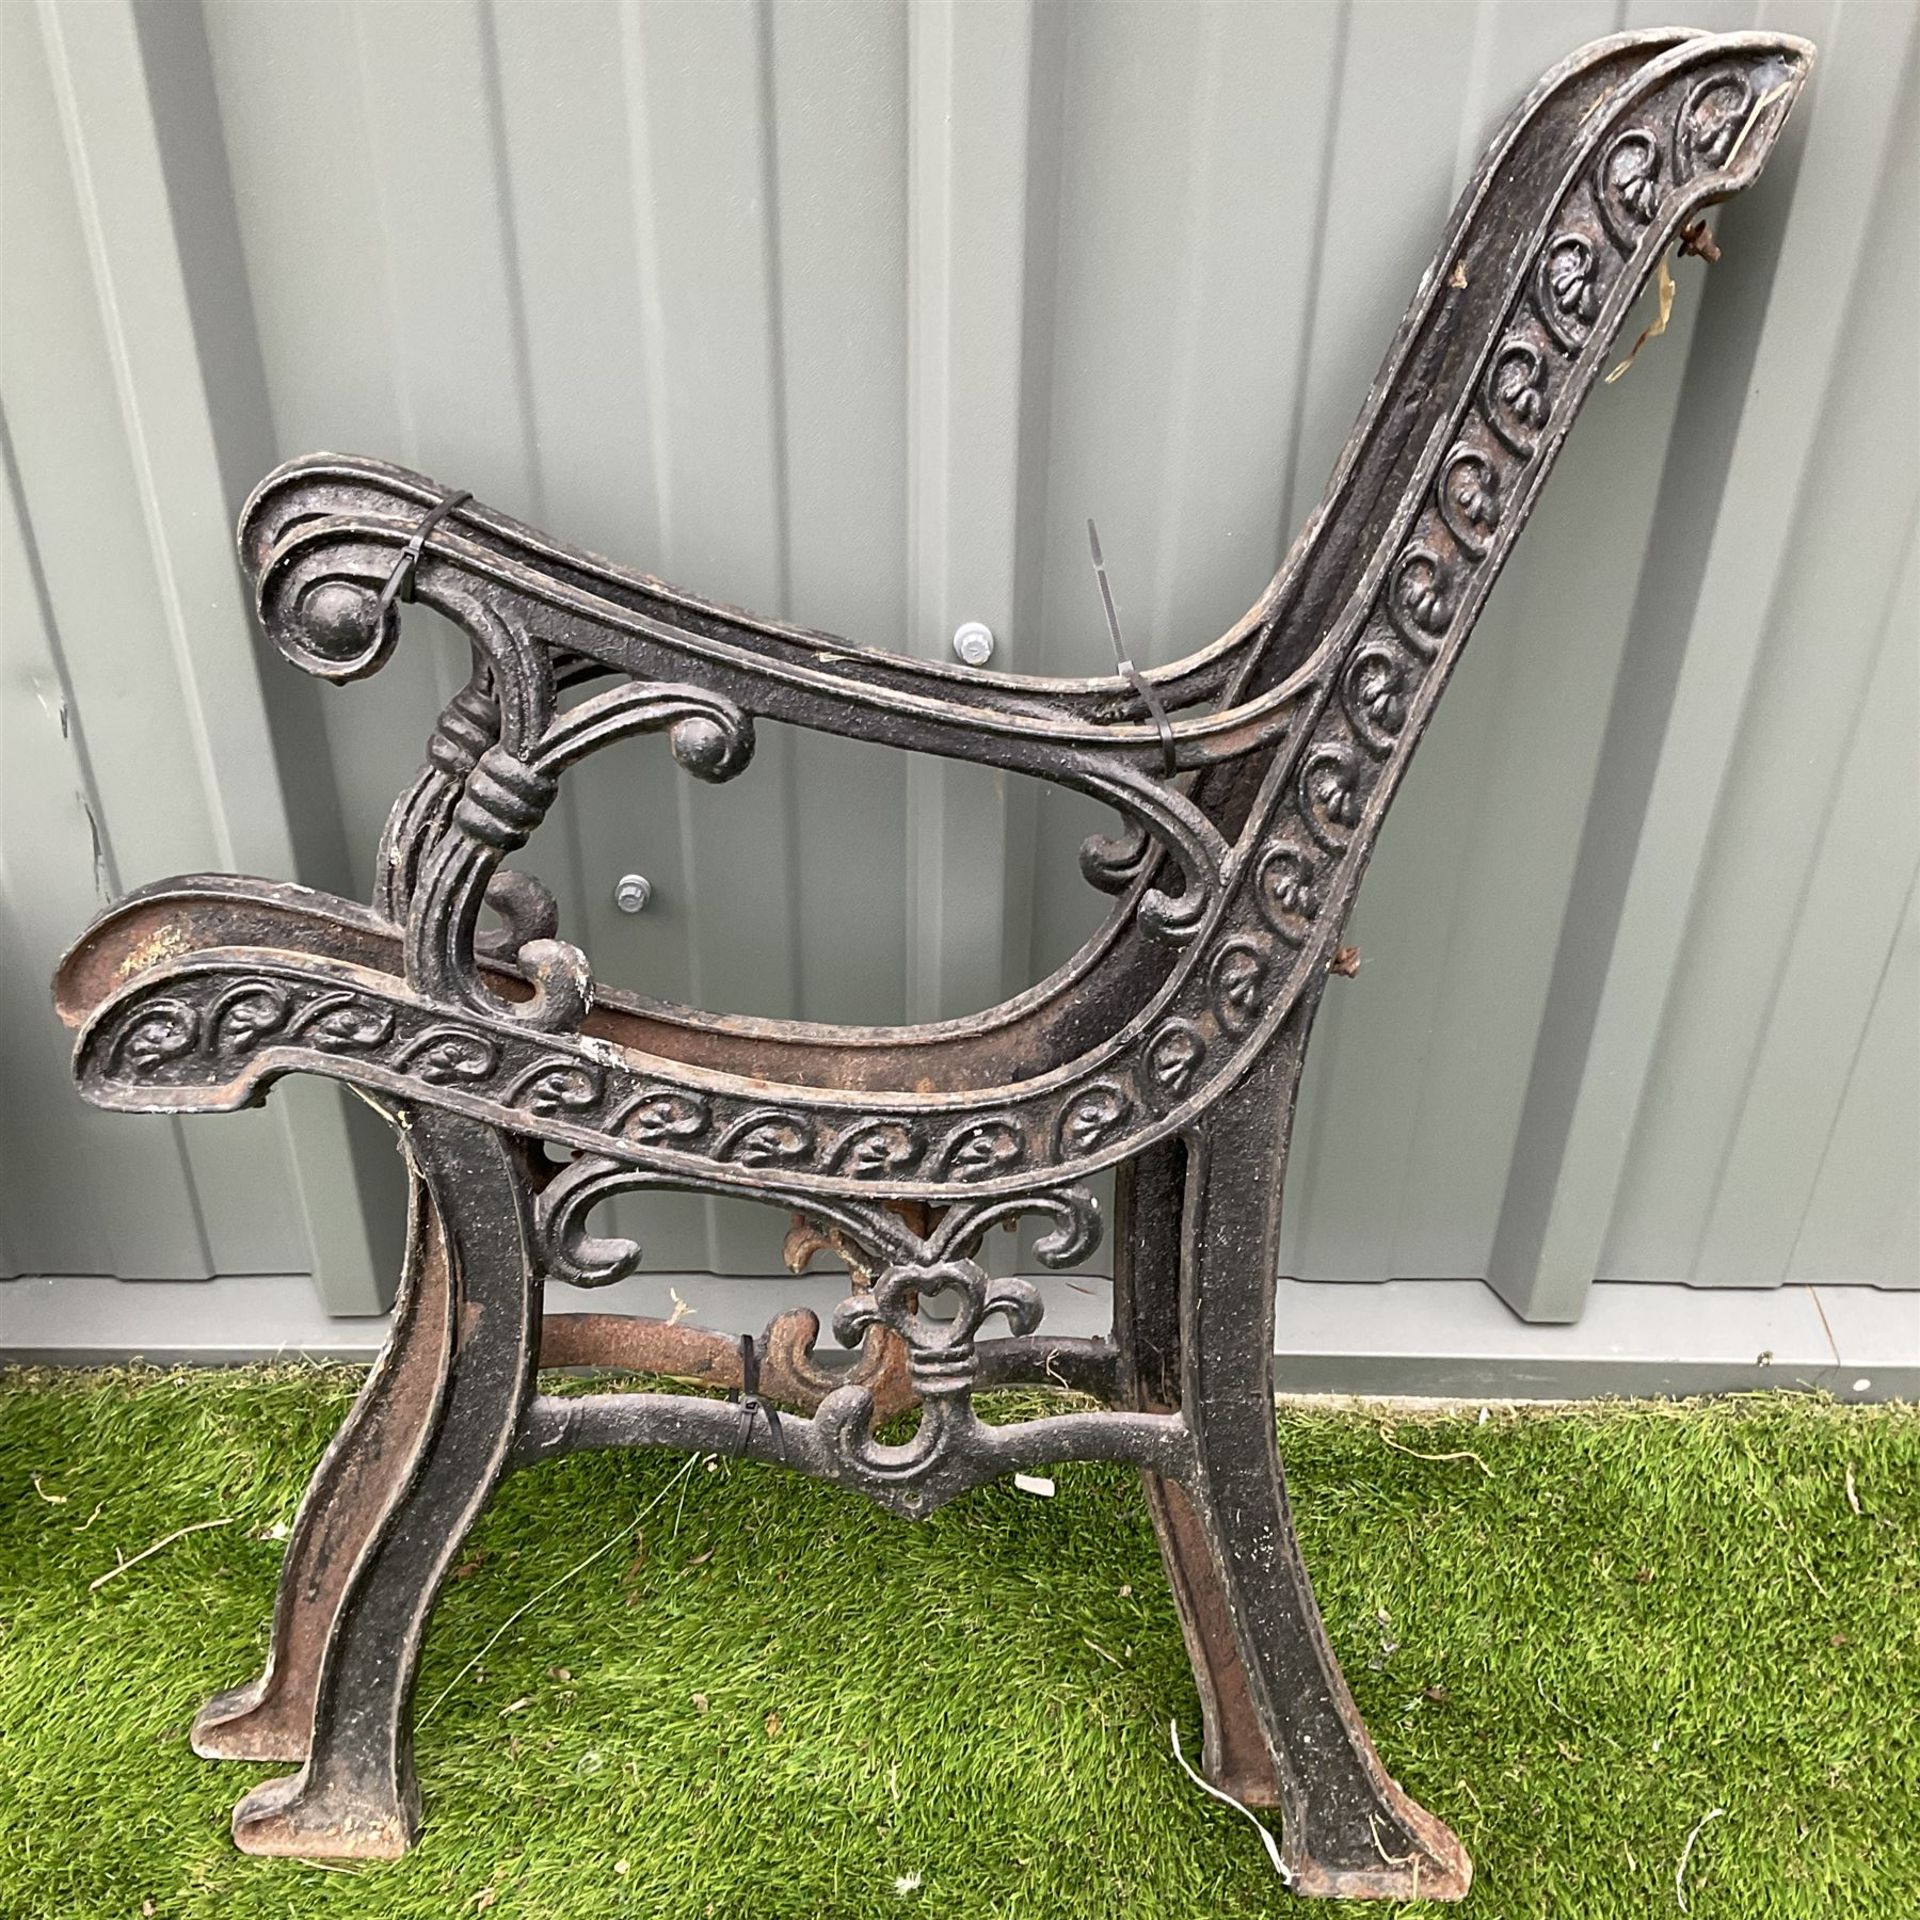 Cast iron garden seat ends and back painted in black - Image 4 of 4